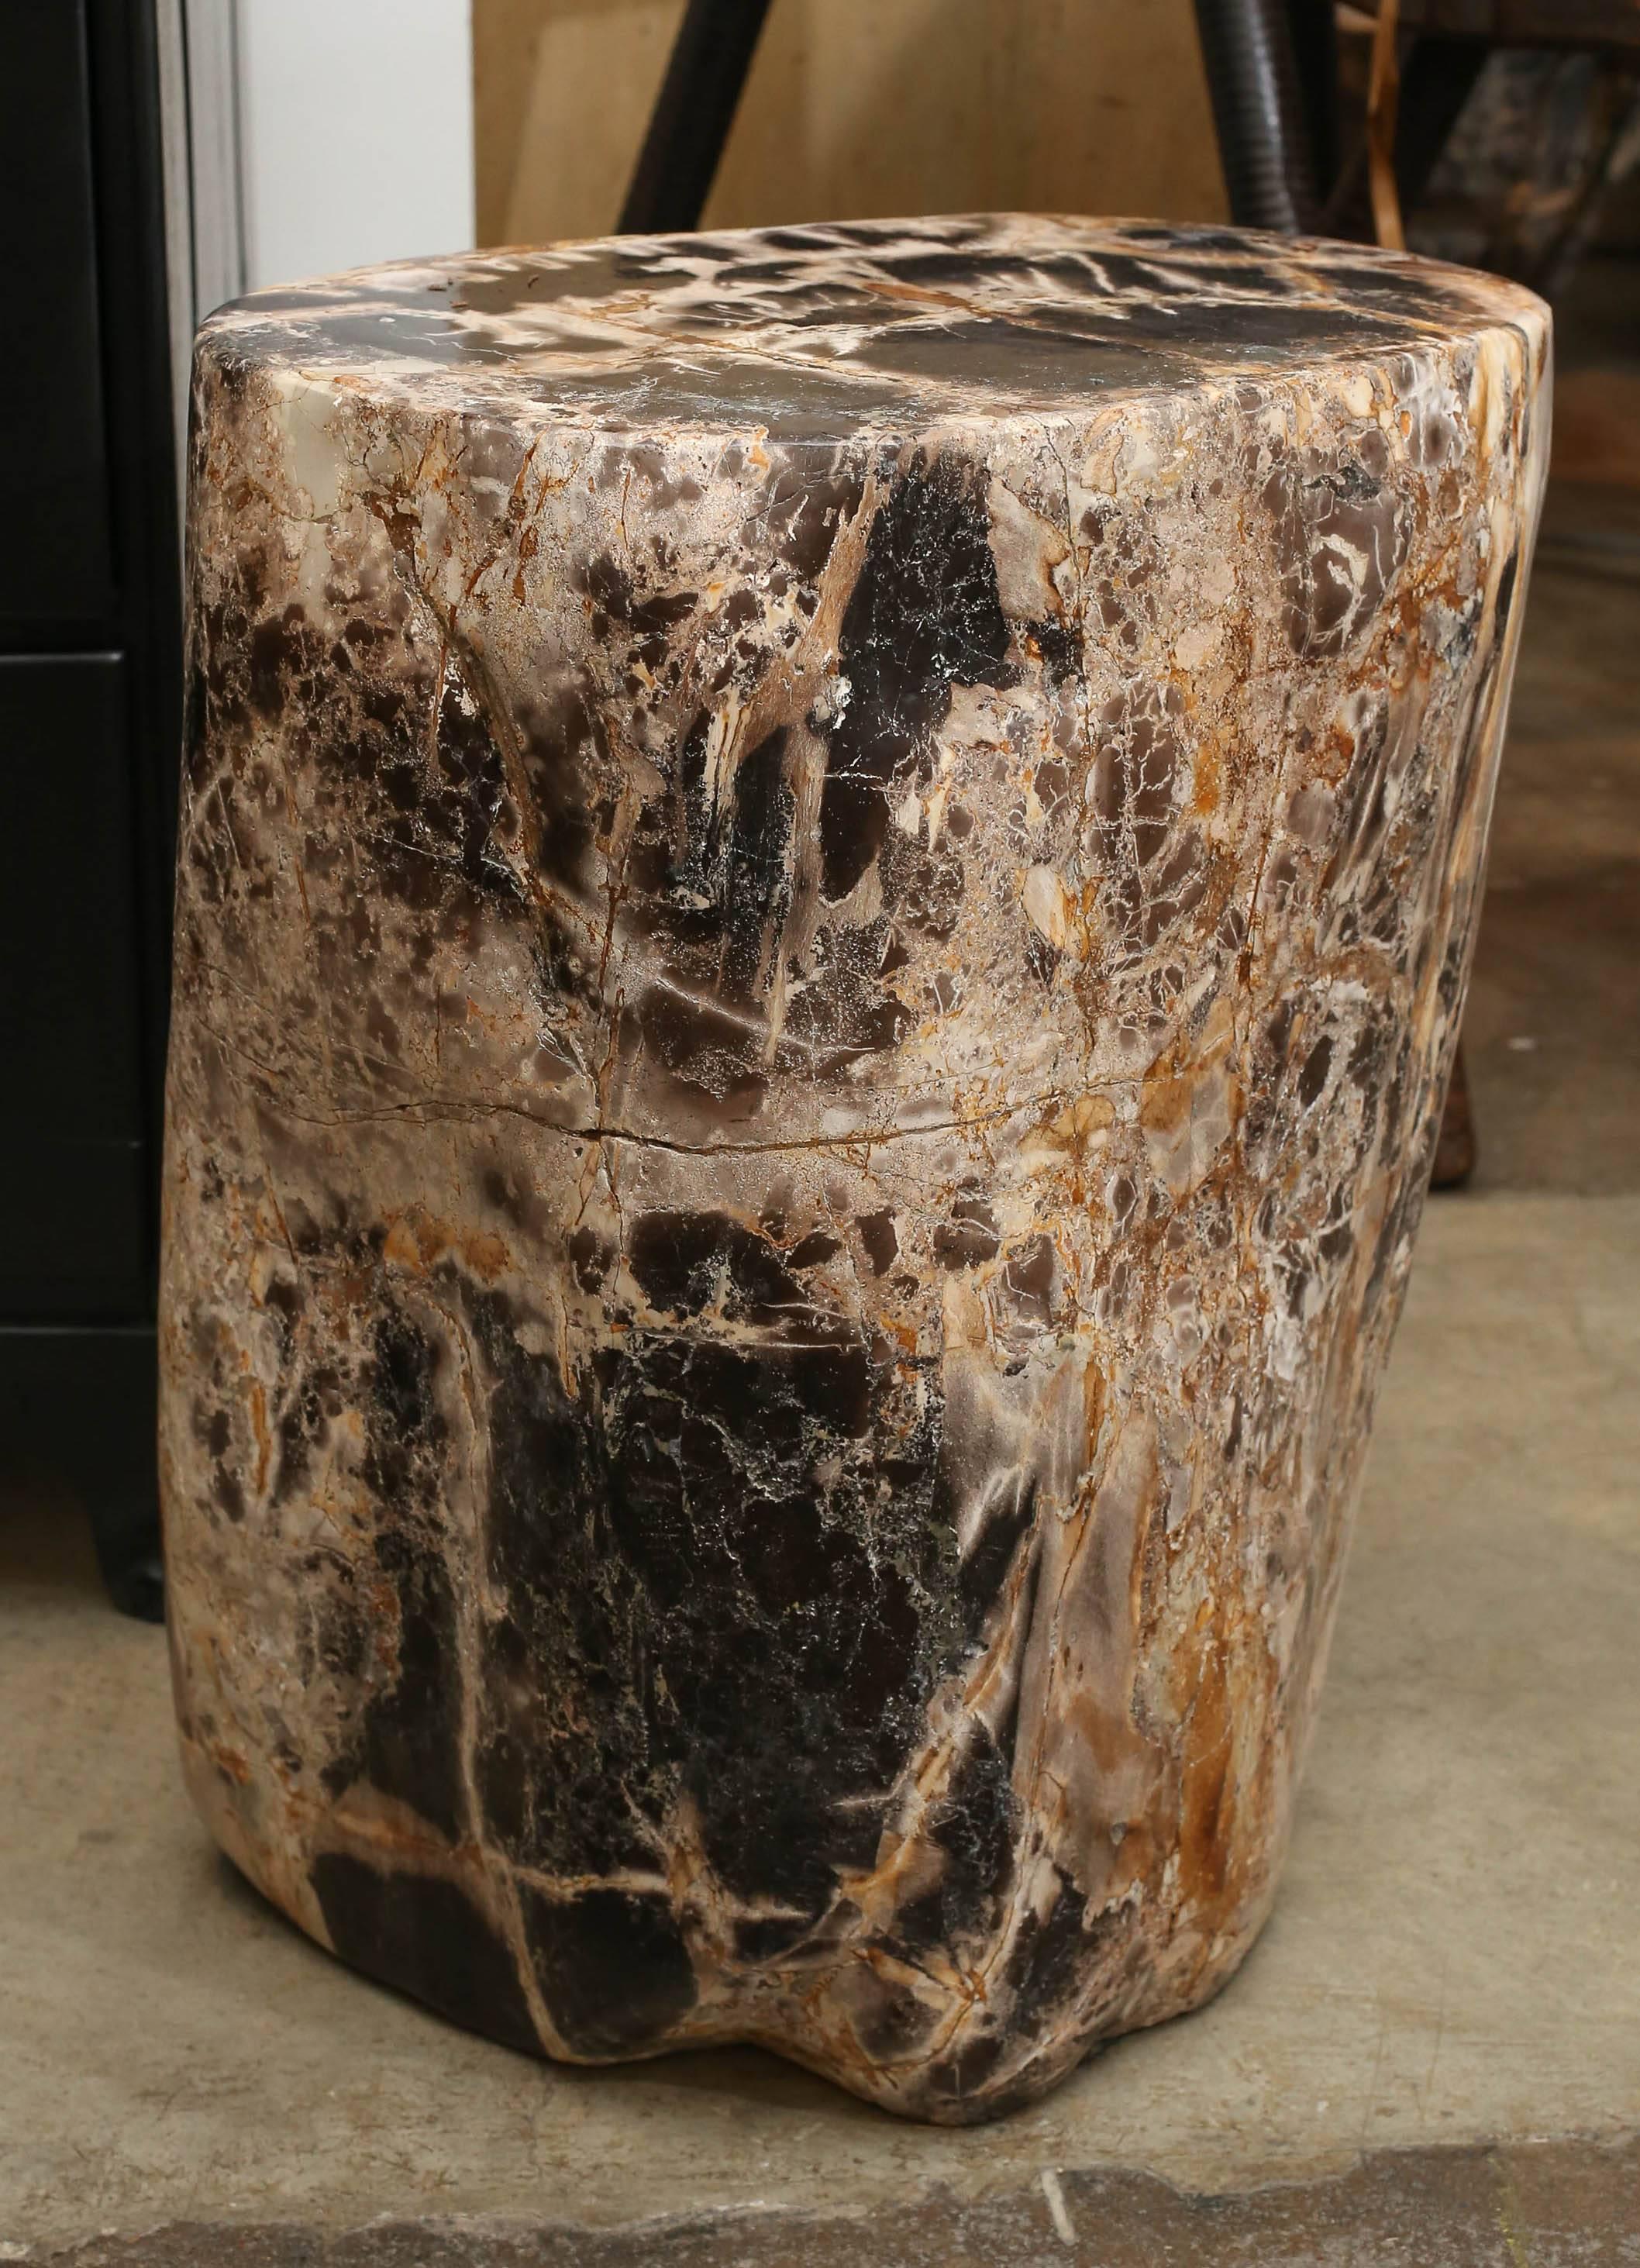 Petrified wood side table. Surface cracks are superficial and natural to the stone.